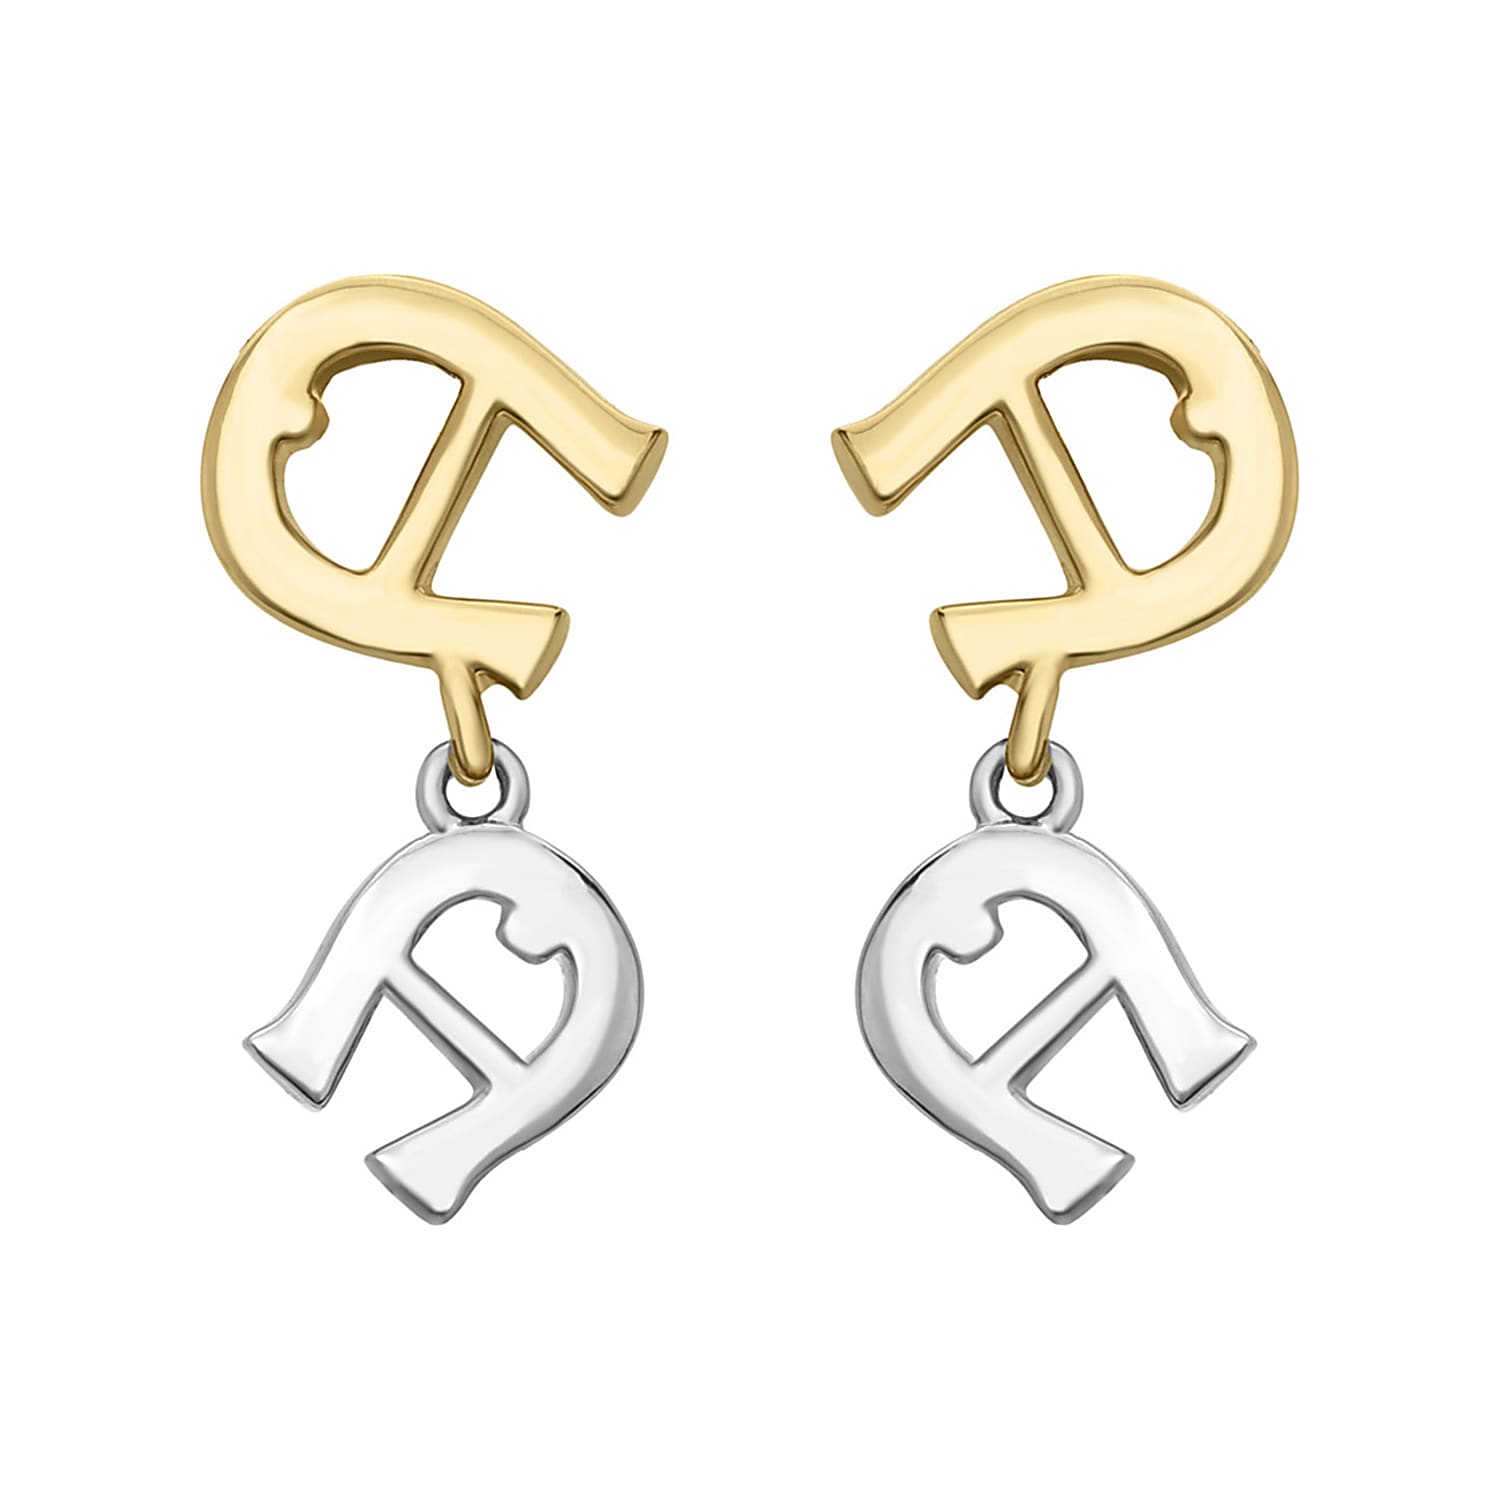 Earrings A-logo gold and silver